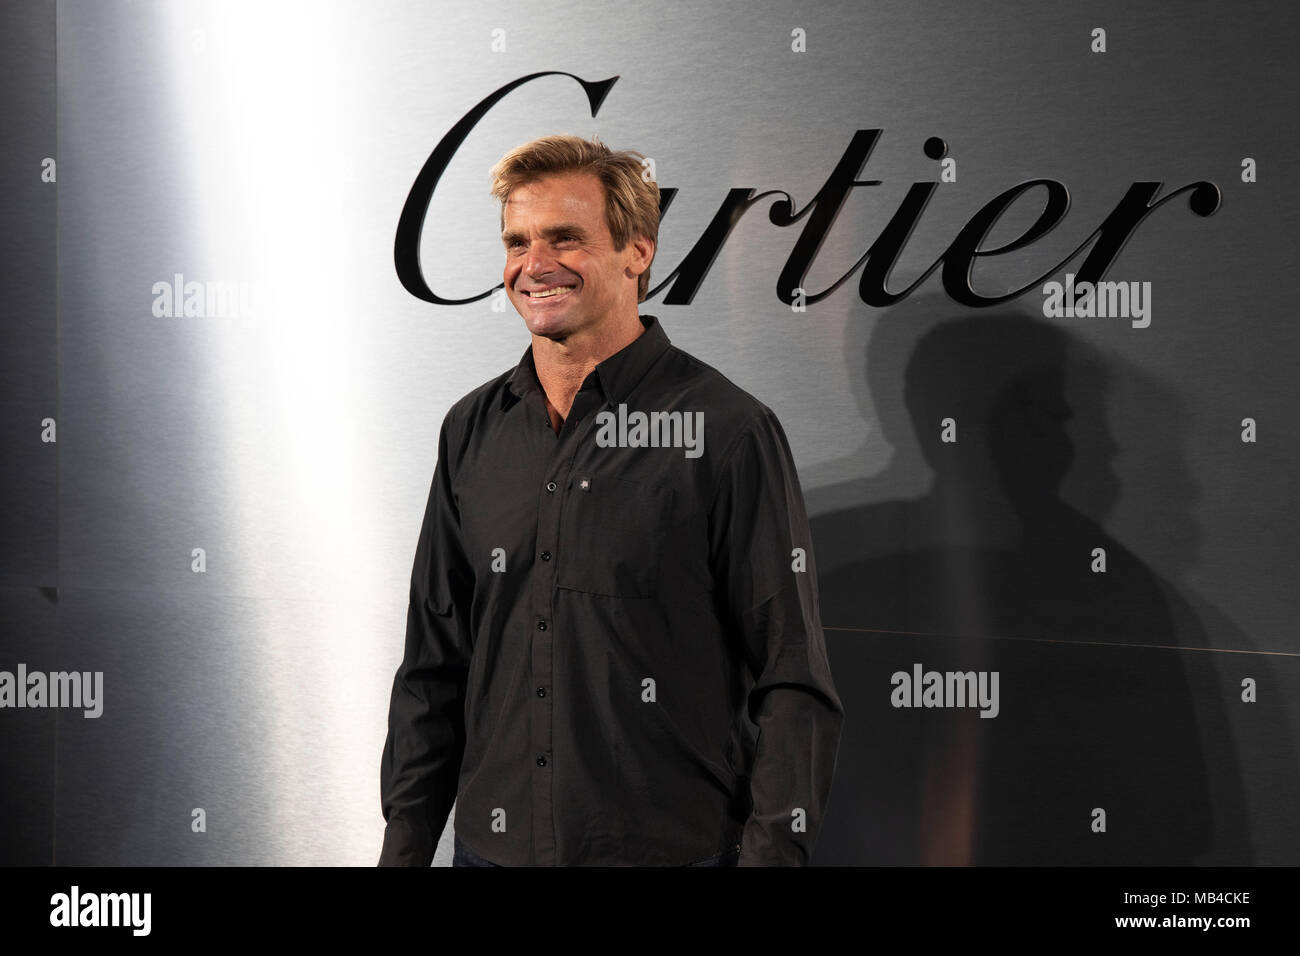 San Francisco, California, USA. 5th Apr, 2018. Surfer LAIRD HAMILTON arrives on the red carpet for the Santos de Cartier Watch Launch at Pier 48 on April 5, 2018 in San Francisco, California Credit: Greg Chow/ZUMA Wire/Alamy Live News Stock Photo